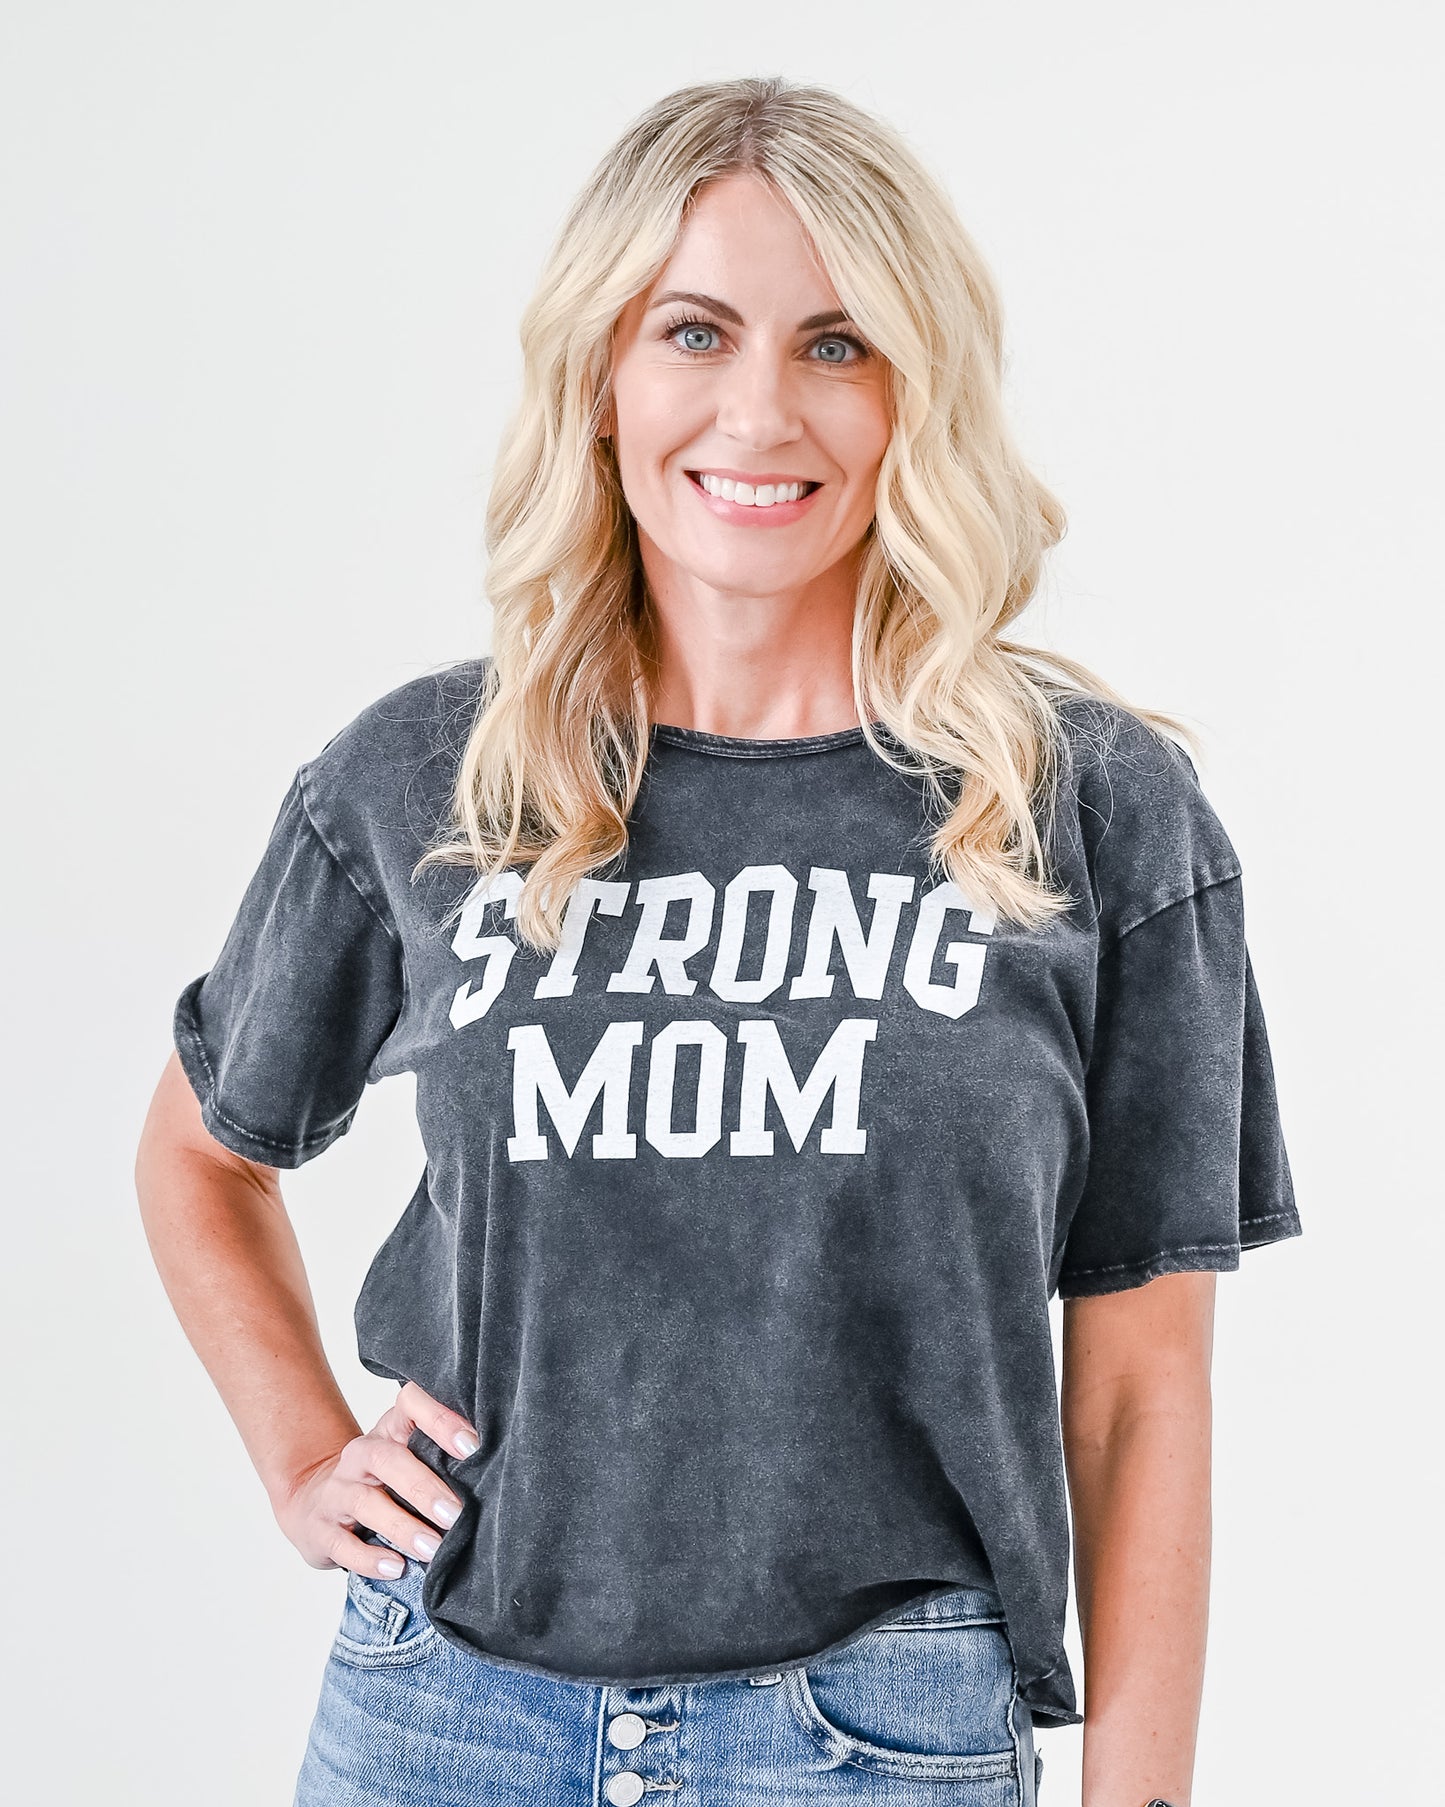 "Strong Mom" Mineral Washed Top